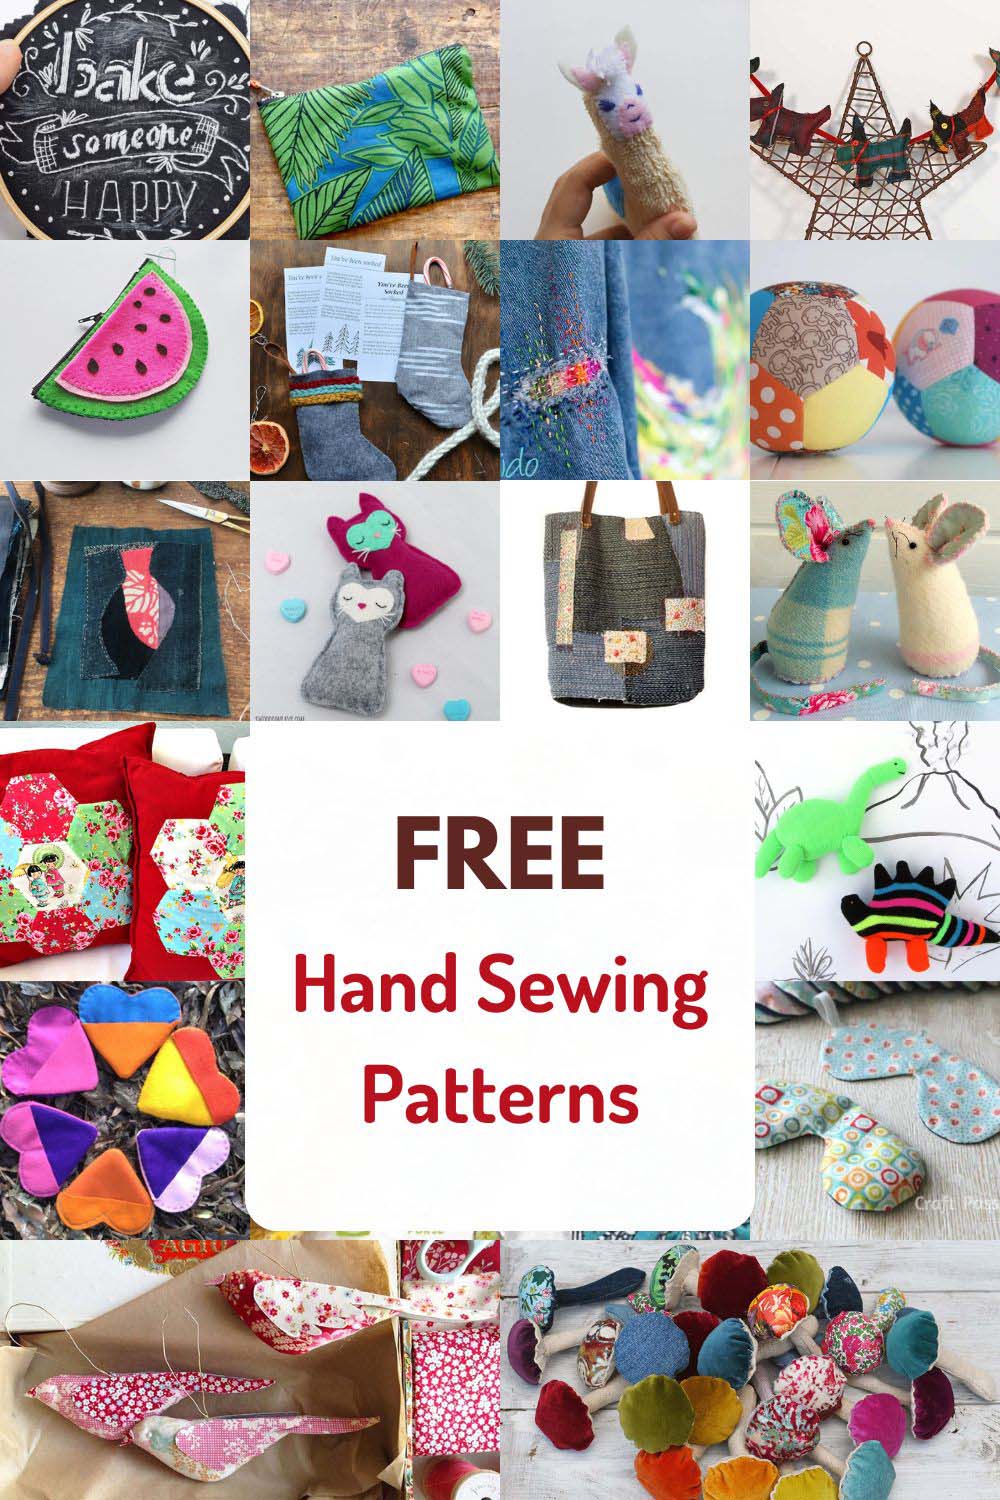 Easy sewing patterns for kids - Fun Crafts Kids